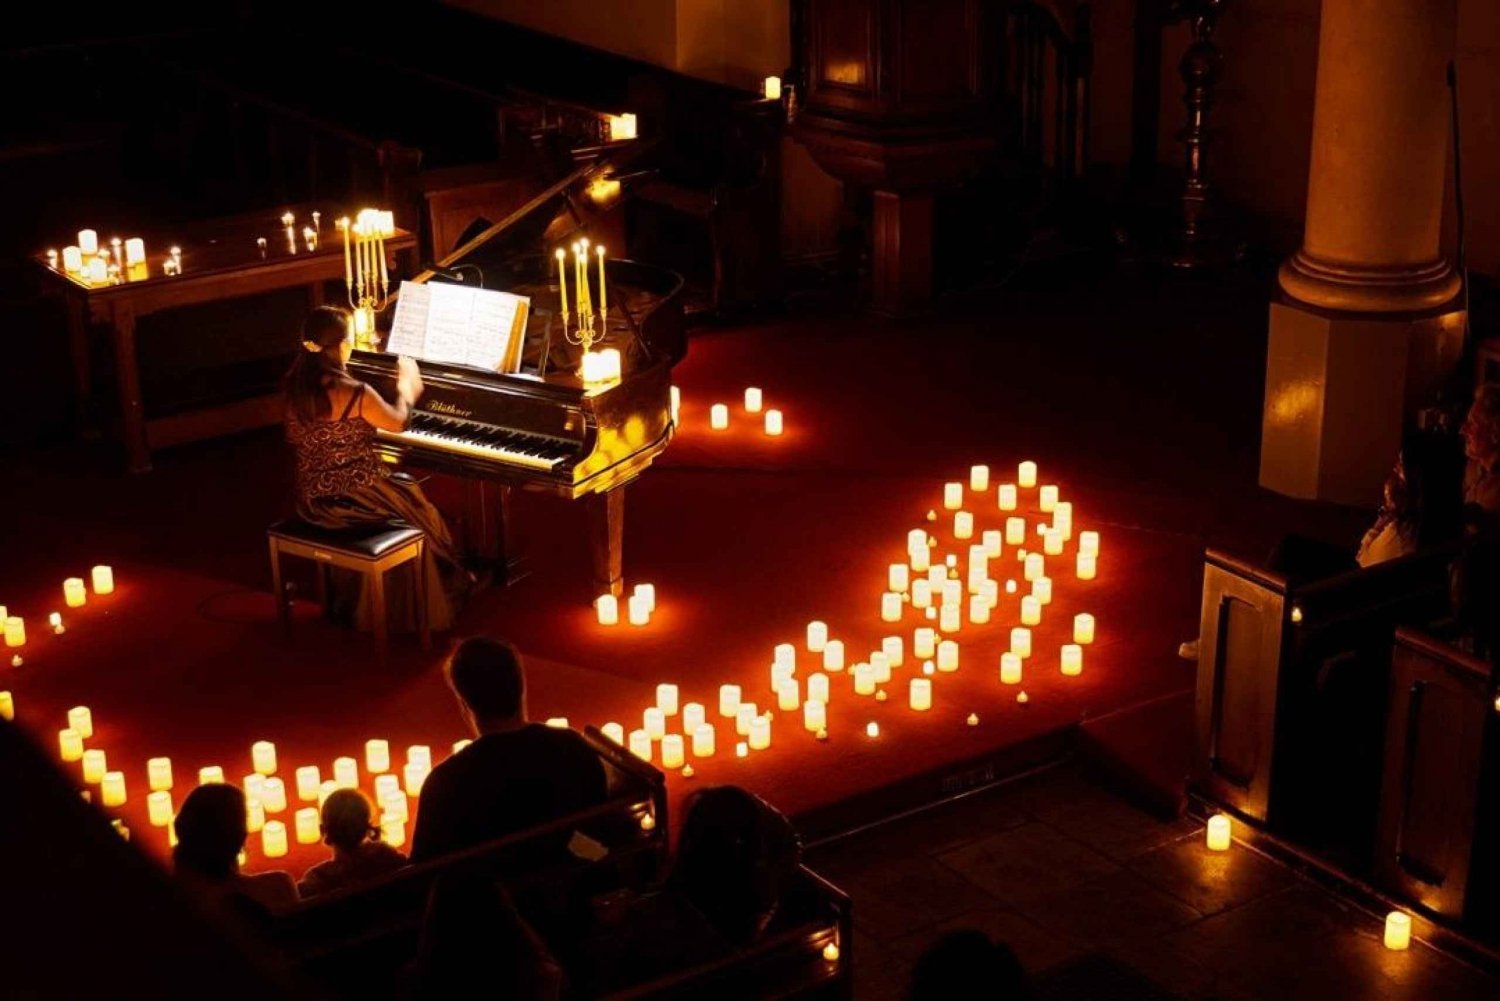 London: Candlelight Concerts Club